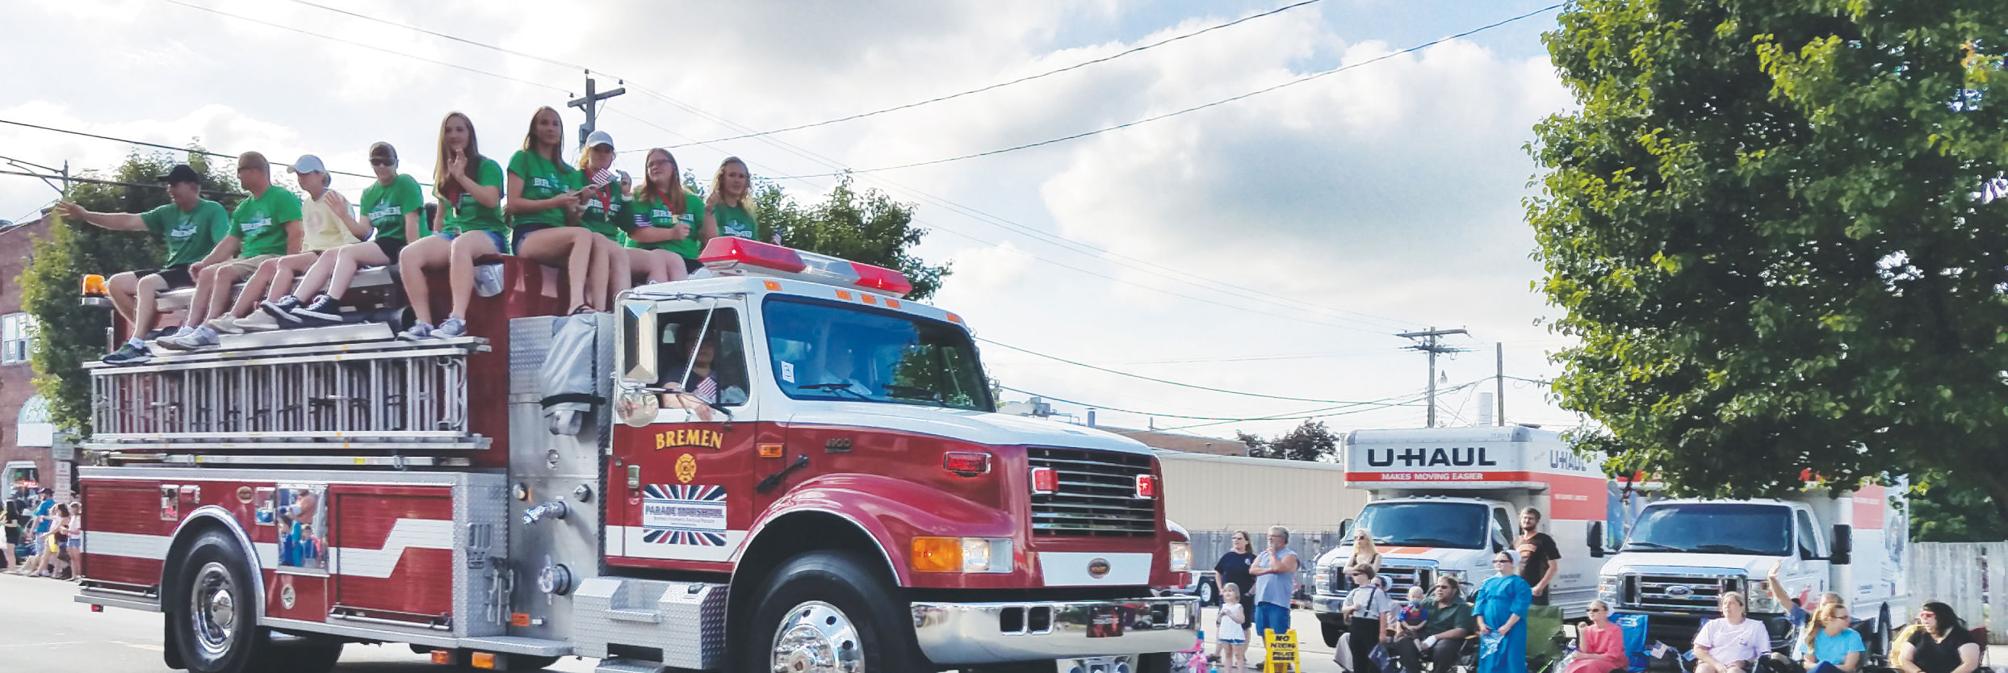 Why the Bremen Firemen’s Festival moved to June News